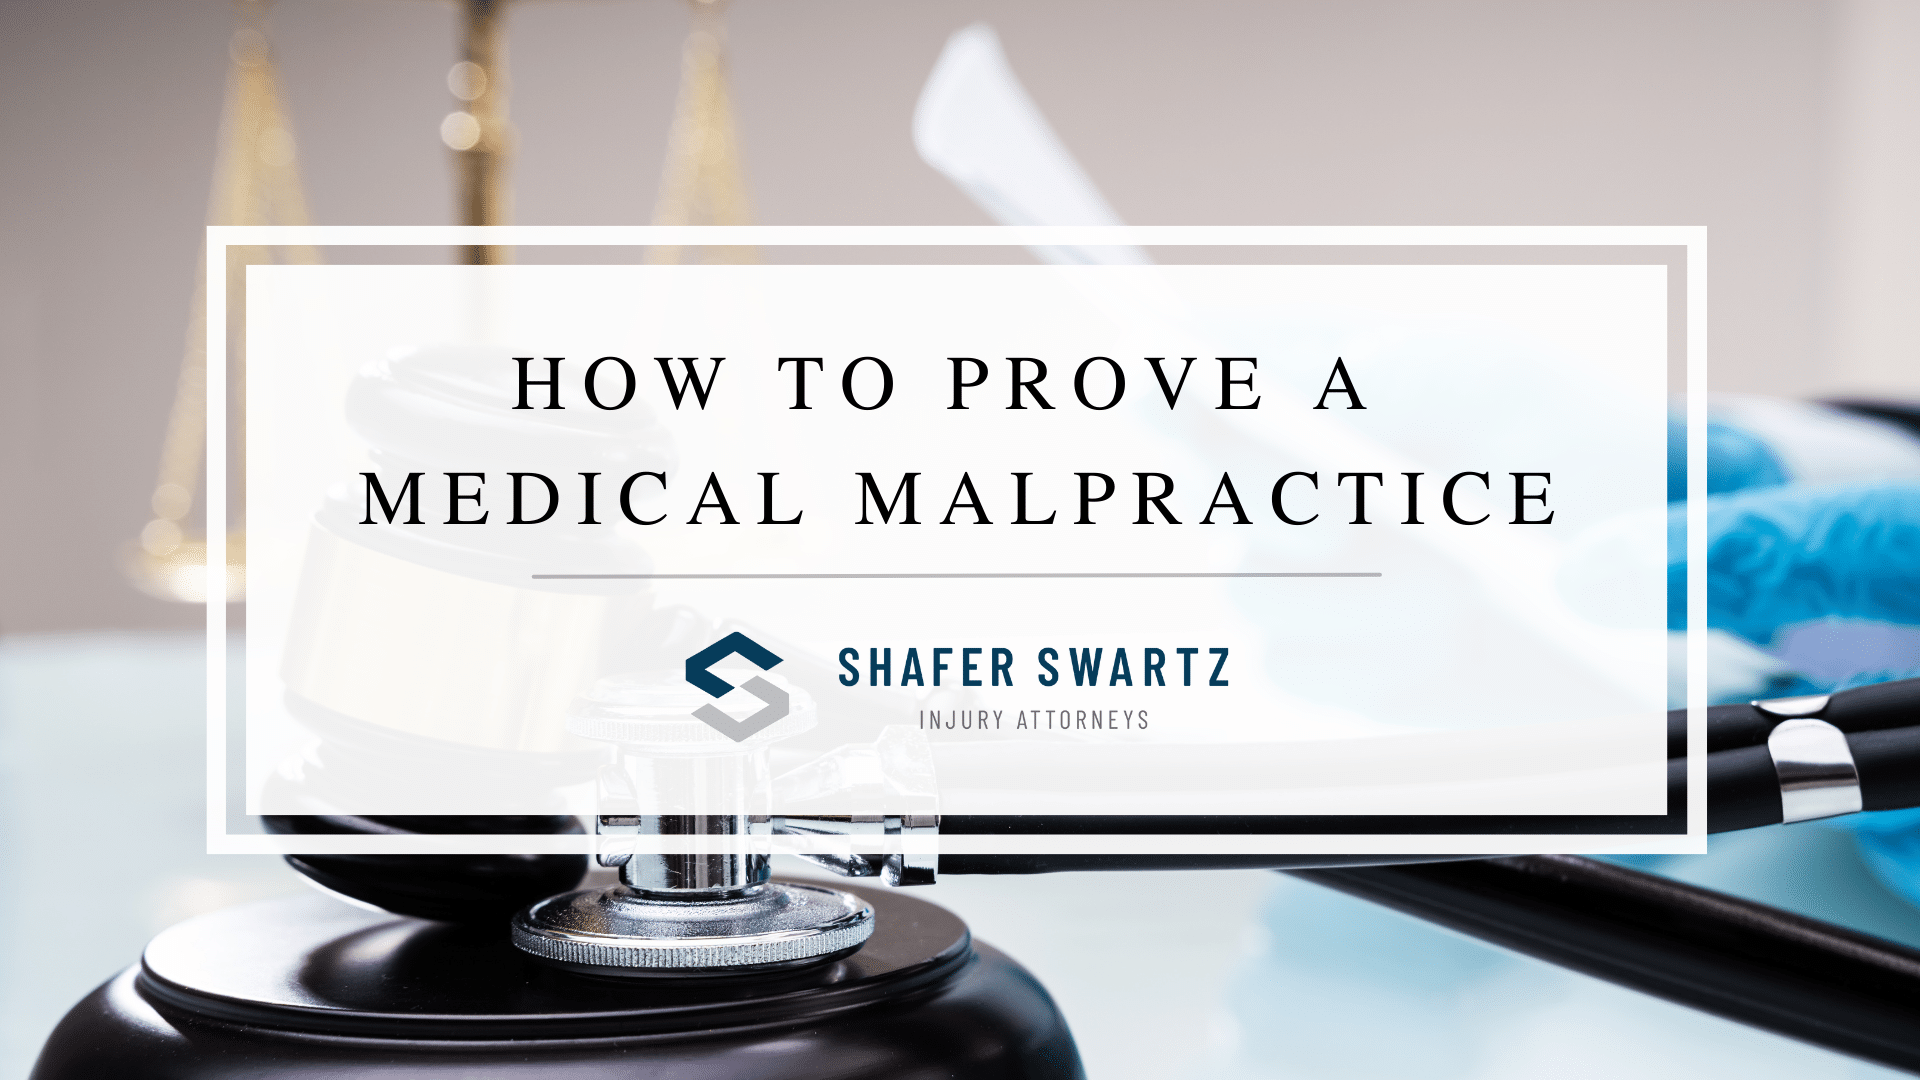 Featured image of how to prove a medical malpractice